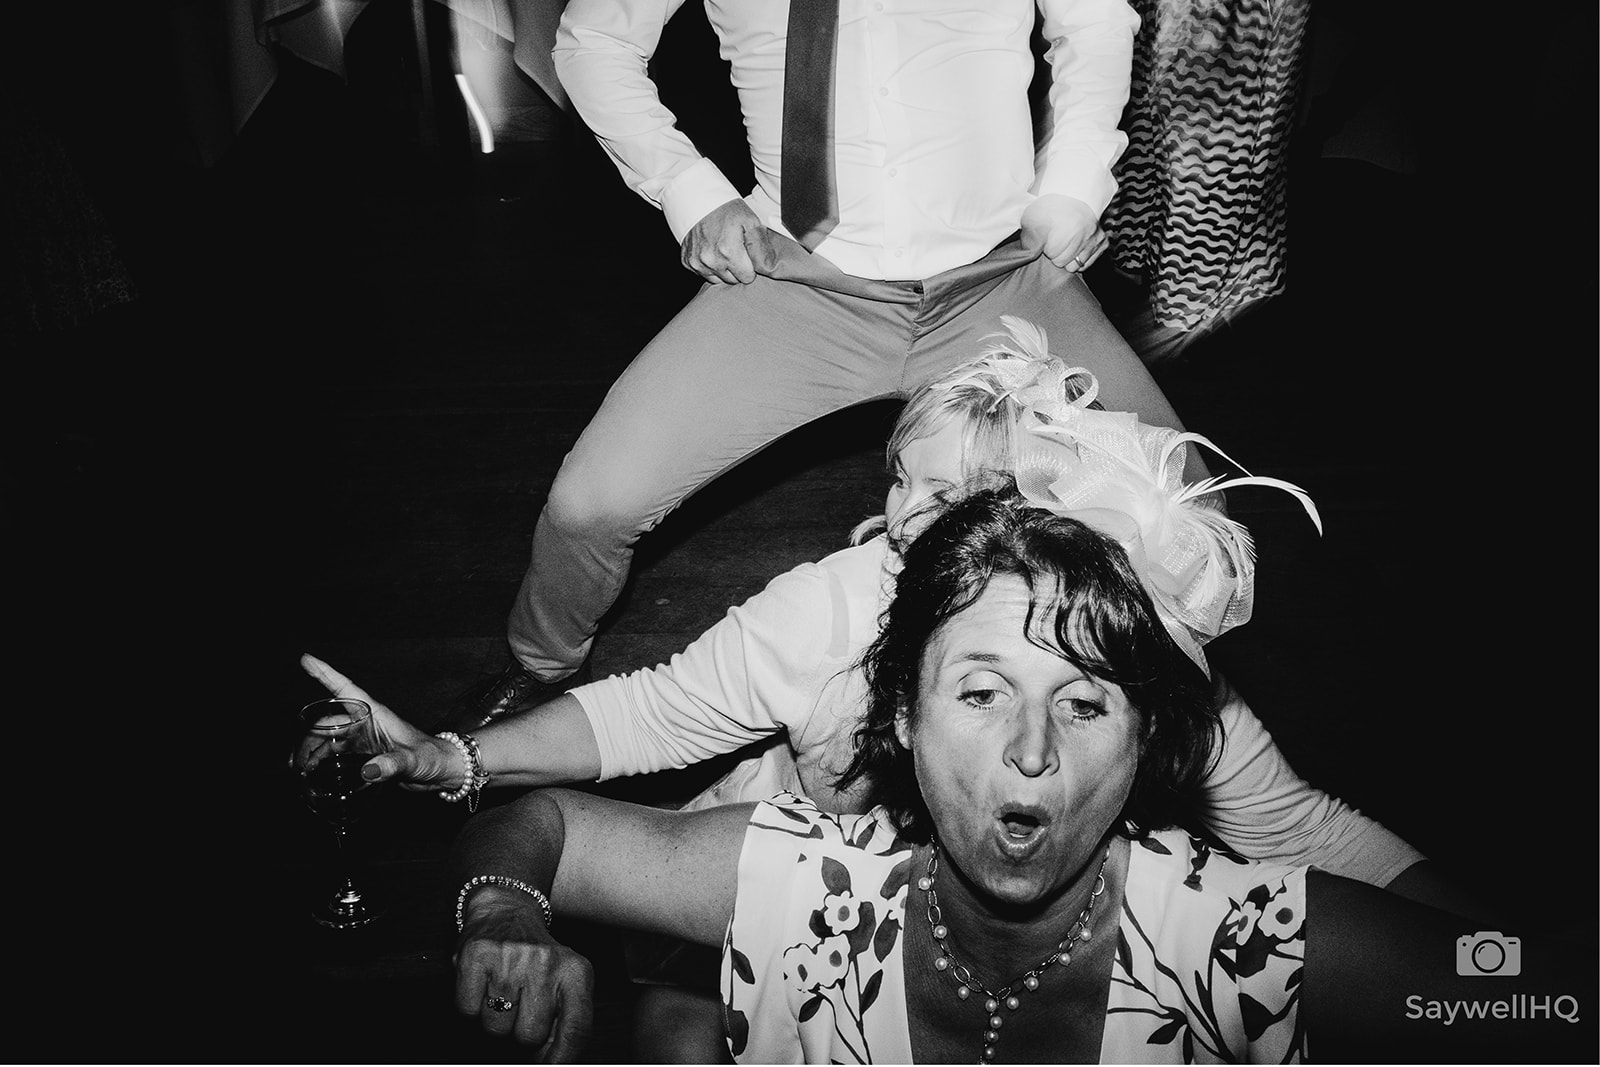 The Chequers Inn Wedding Photography - the wedding guest dancing on the floor